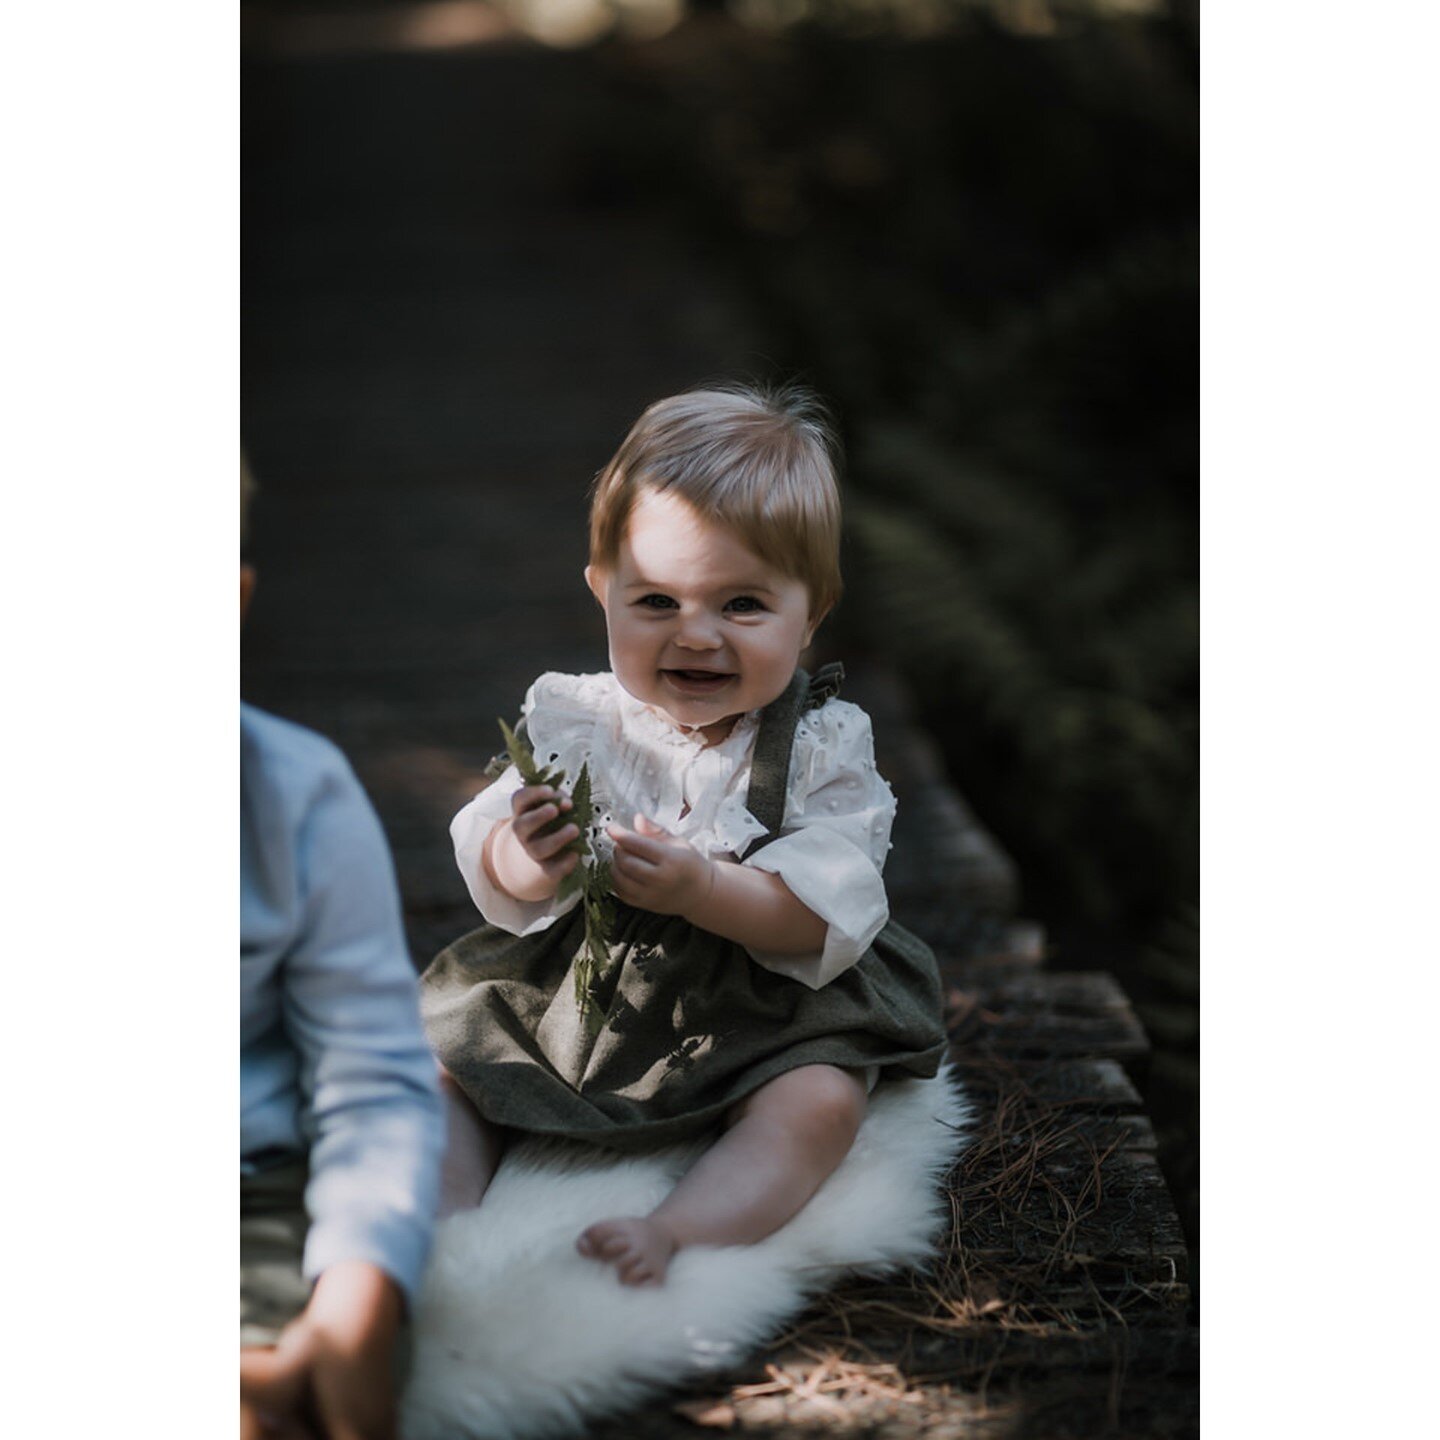 Cutiepie just moments before she fell. Luckily only a small scratch. 😅 Probably scared me more than her. Haha. ⁠
⁠
⁠
 #love #mom #mothersdaygift #happymothersday #mother #mum #giftideas #motherhood #mothers #mothersdaygifts #family #familyphotograph